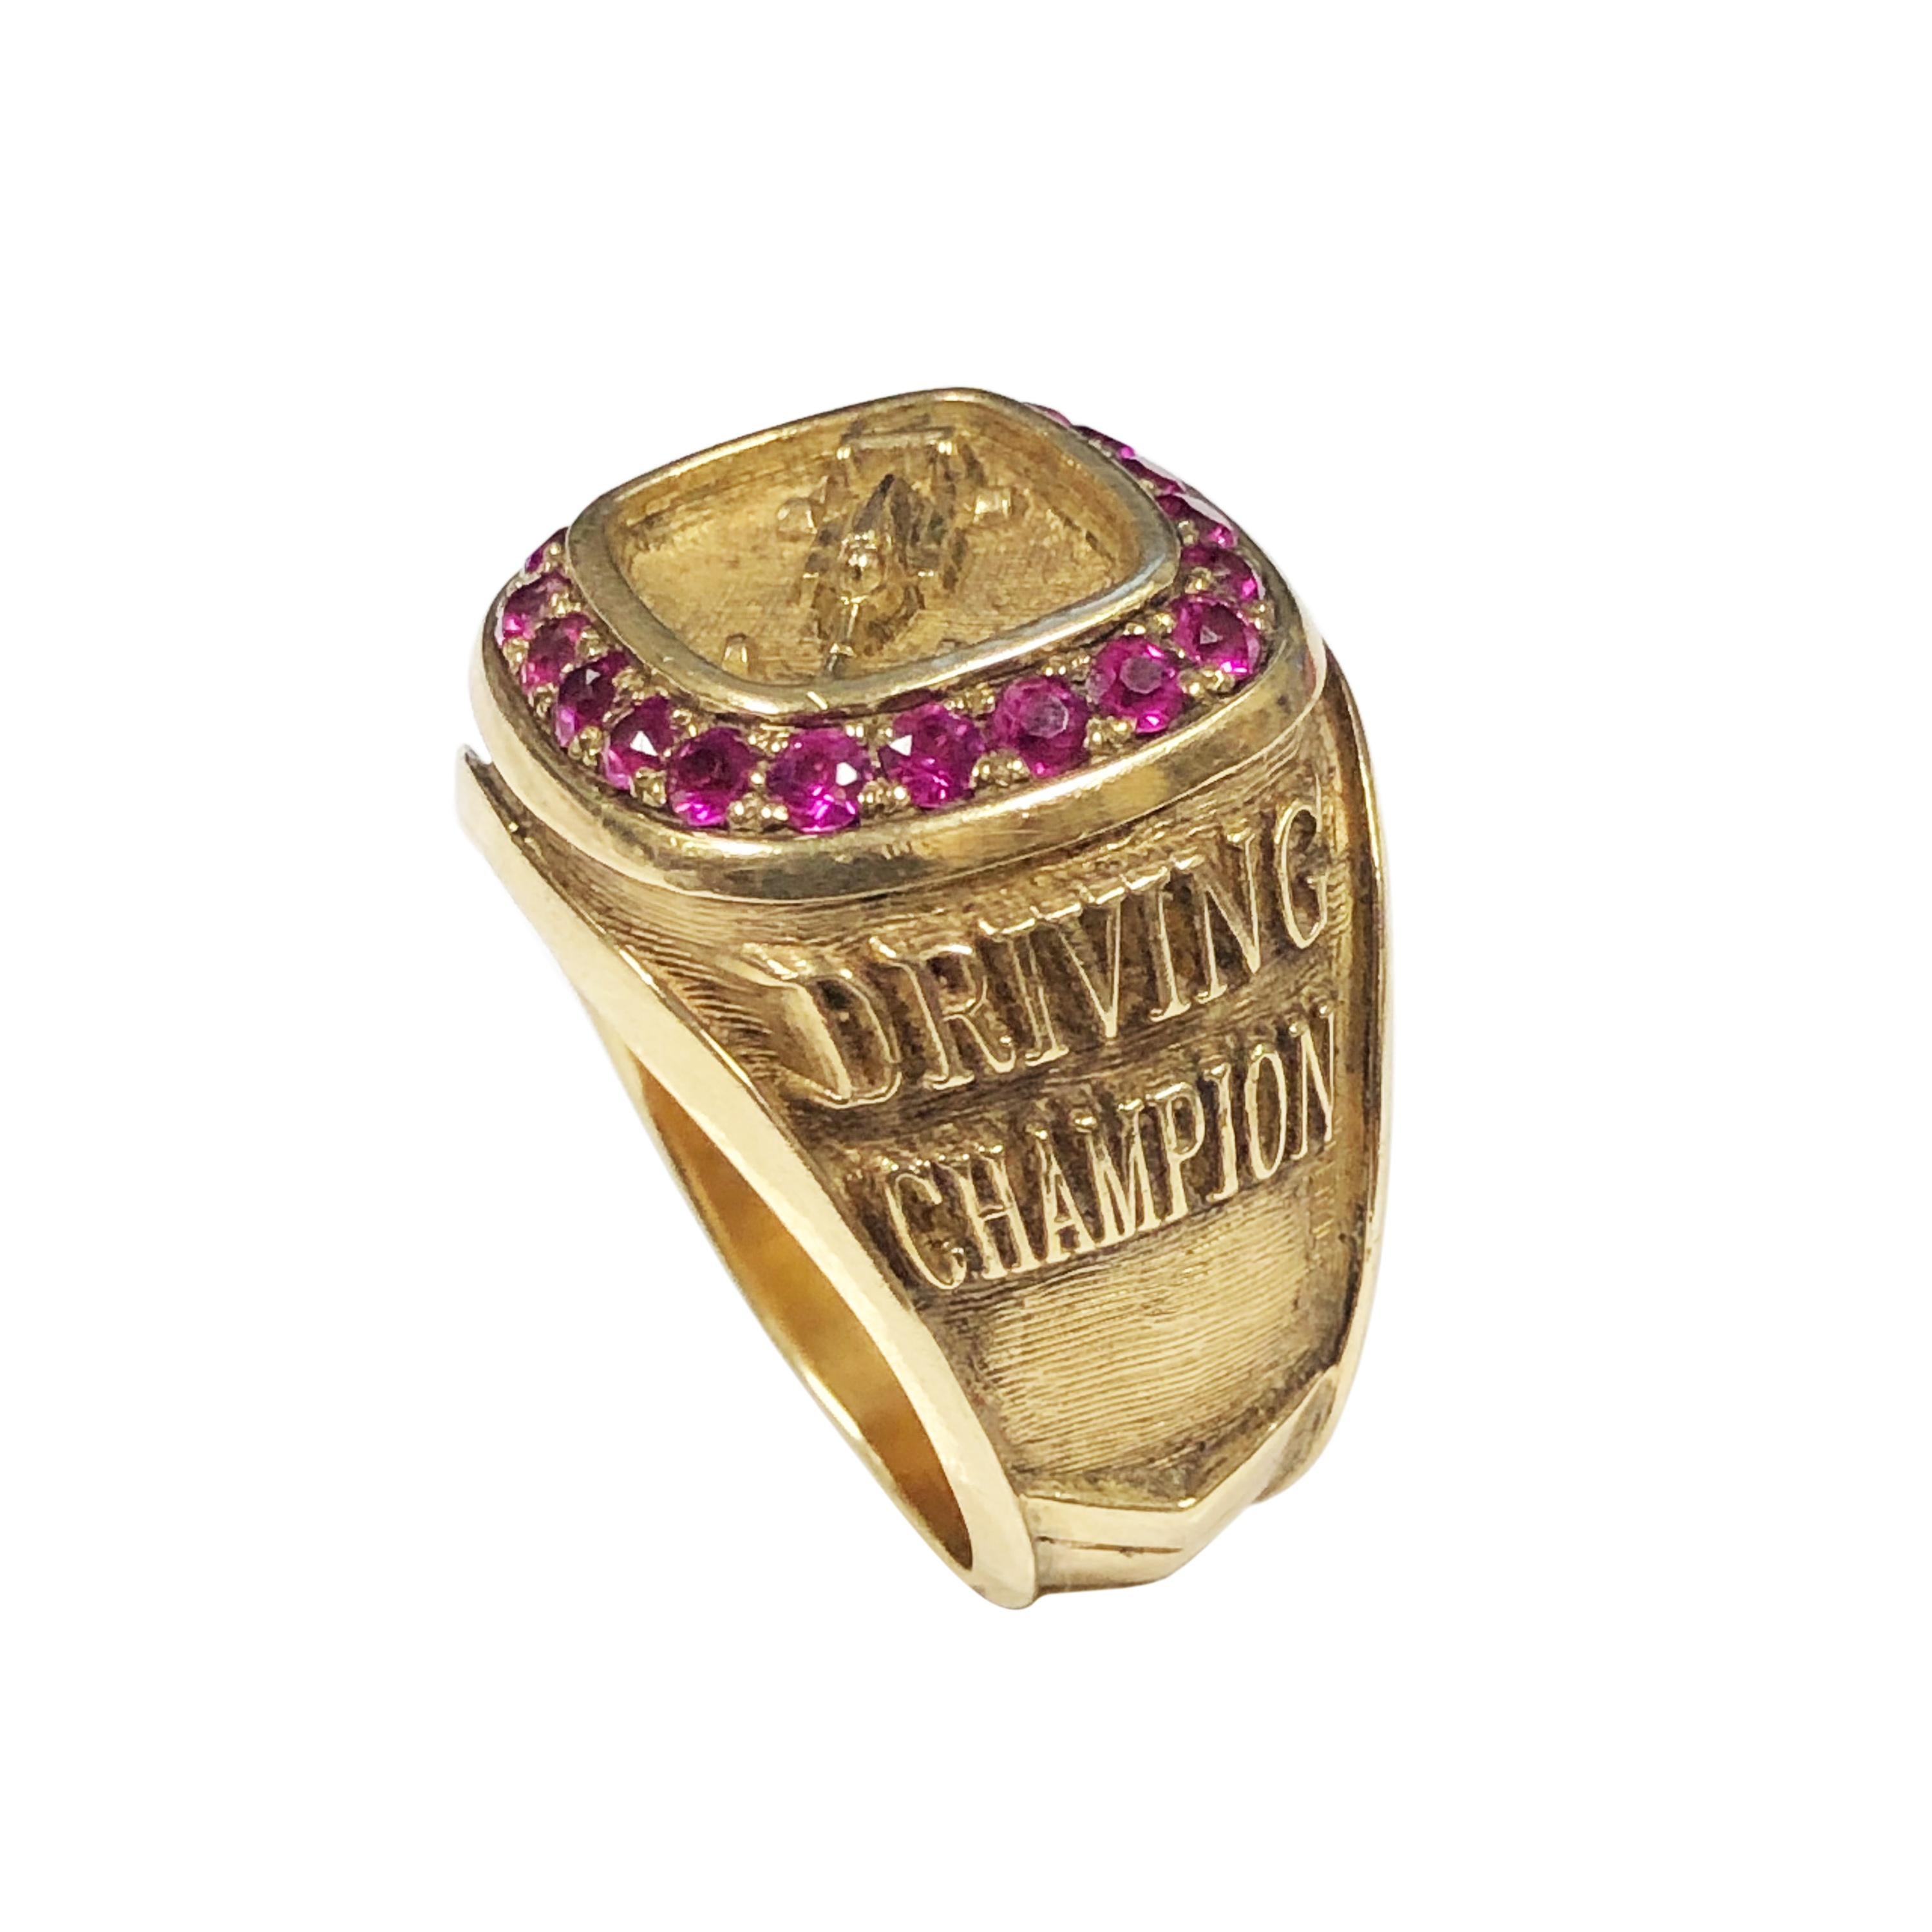 Circa 1980s 10K Yellow Gold Race Car Champion Ring owned and worn by Hollywood Legend Burt Reynolds,  Reynolds was the owner of Mach 1 Racing, a successful and winning NASCAR team, most likely the ring was a presentation for one of the team wins.